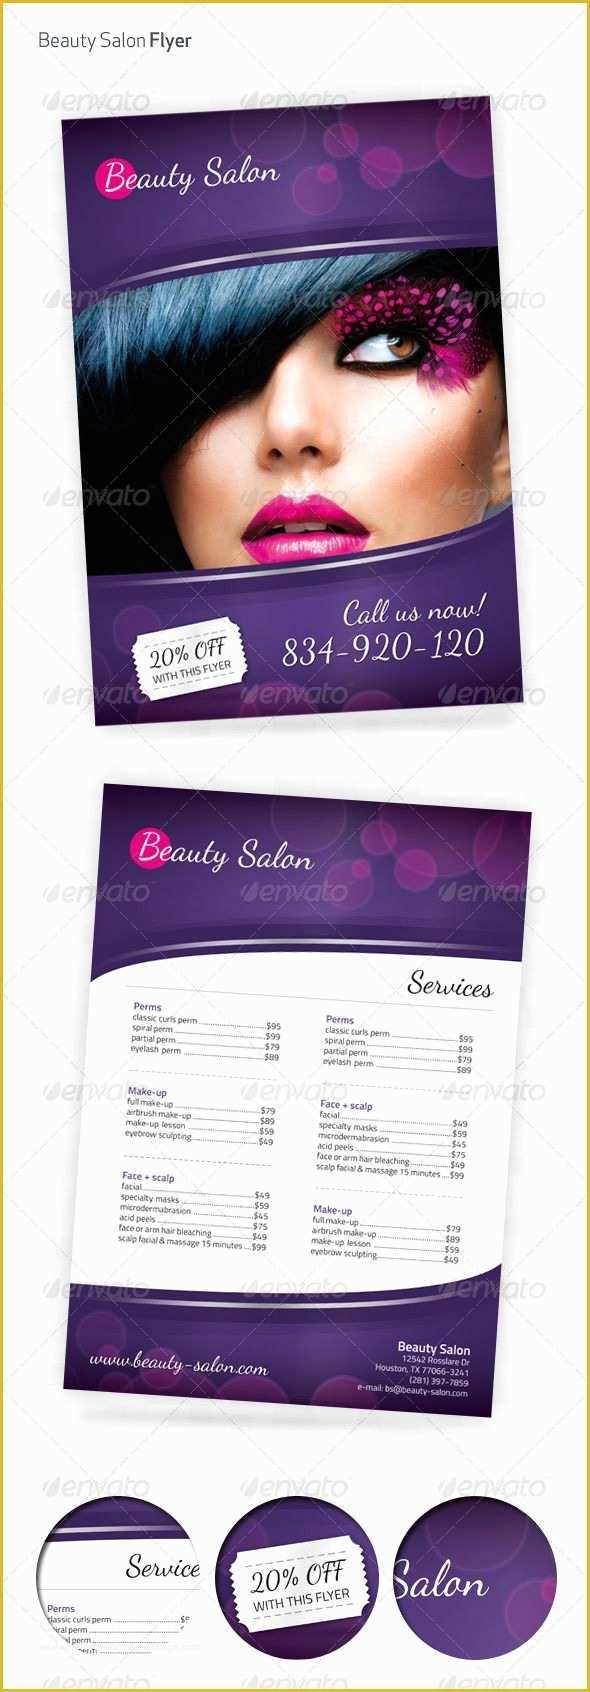 Spa Flyer Templates Free Download Of Beauty Salon Flyer Templates Psd Free Download New Design